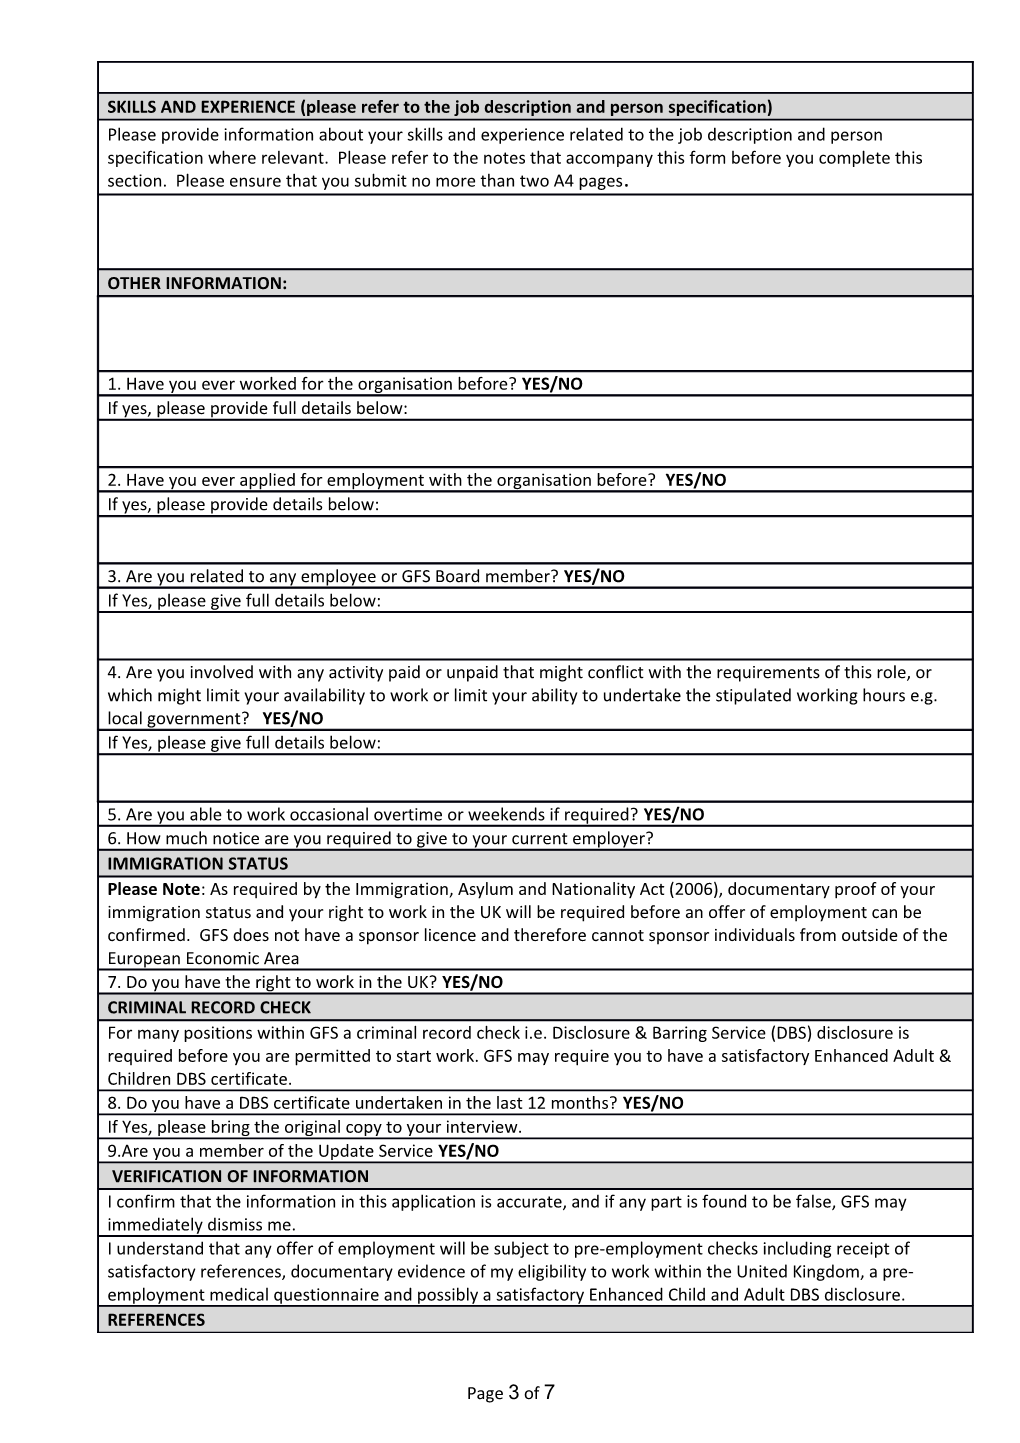 GFS Application Form Guidance Notes